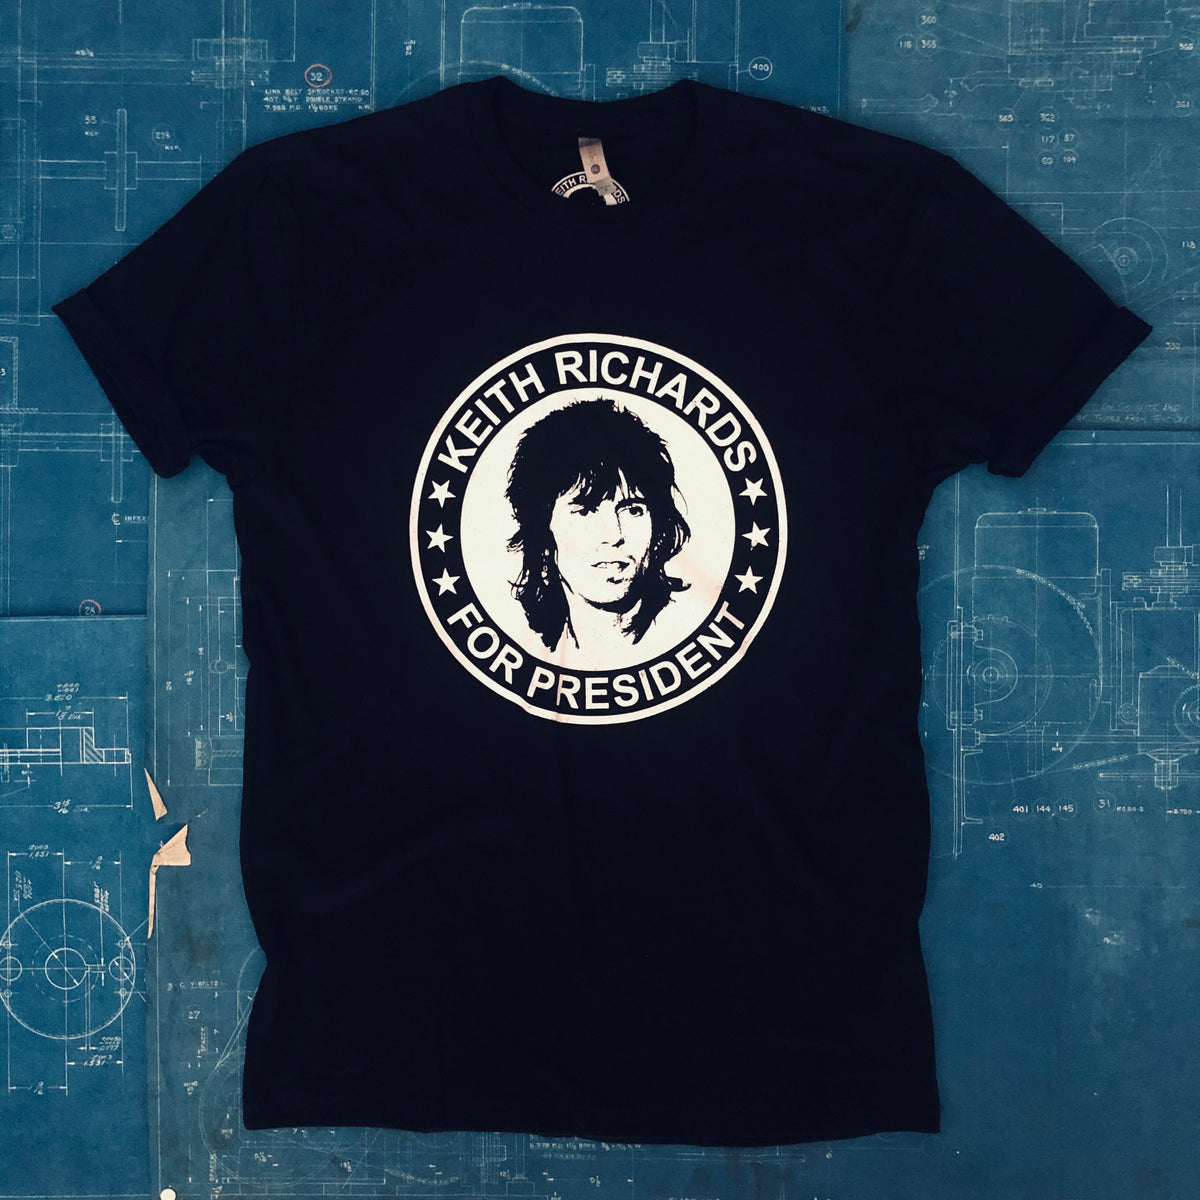 A "KEITH RICHARDS FOR PRESIDENT" TSY TEE T-SHIRT, BLACK